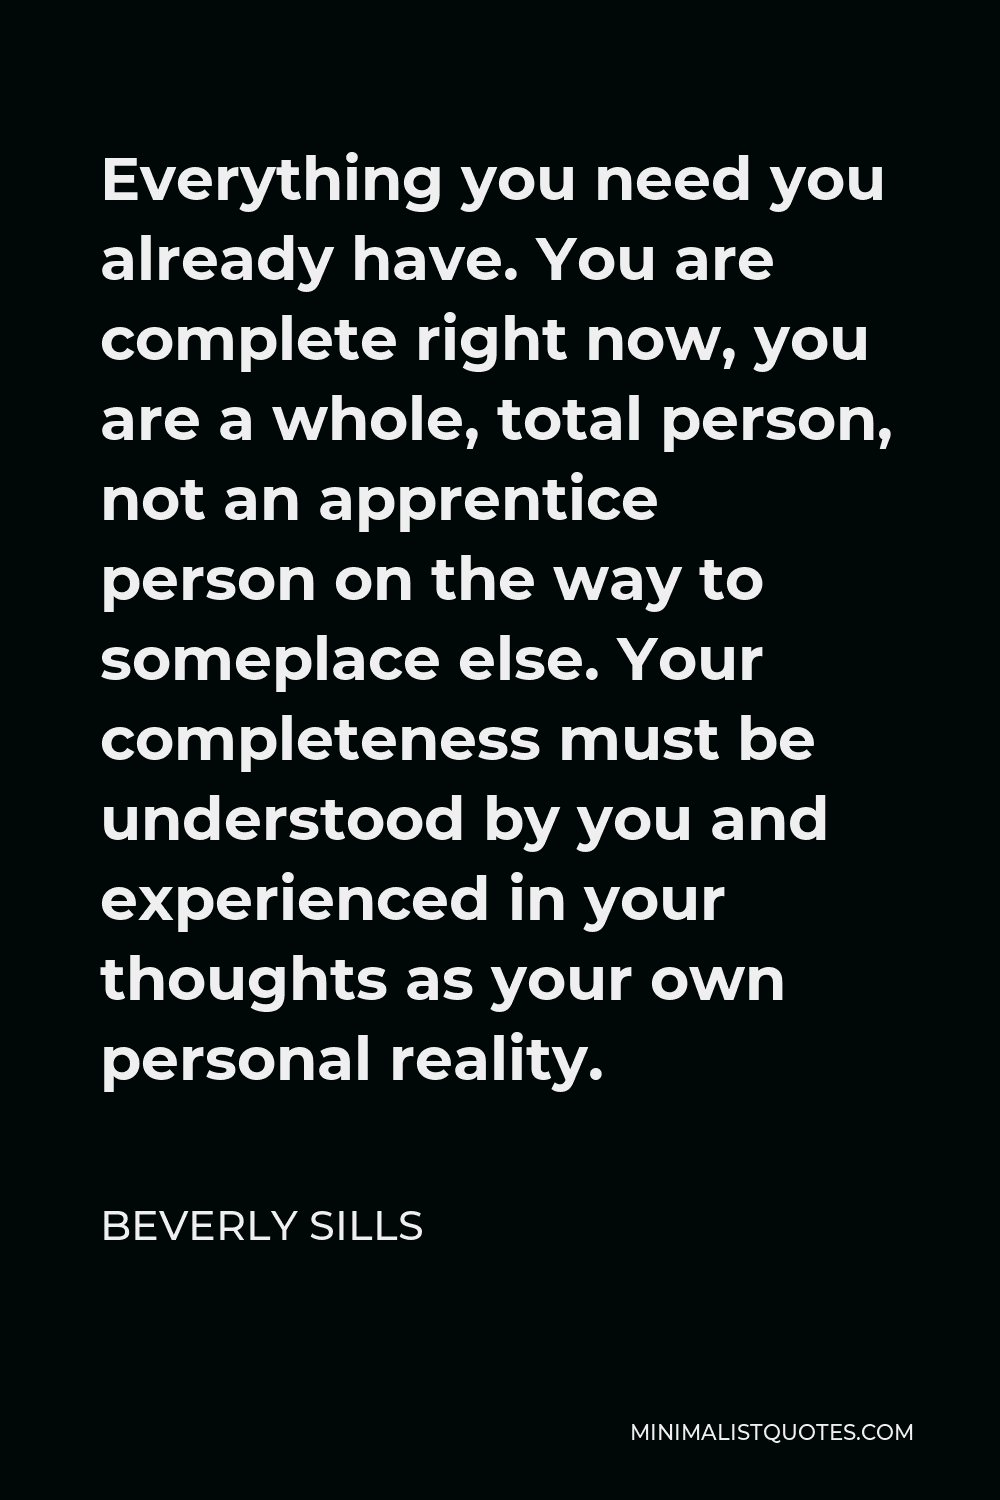 Beverly Sills Quote - Everything you need you already have. You are complete right now, you are a whole, total person, not an apprentice person on the way to someplace else. Your completeness must be understood by you and experienced in your thoughts as your own personal reality.